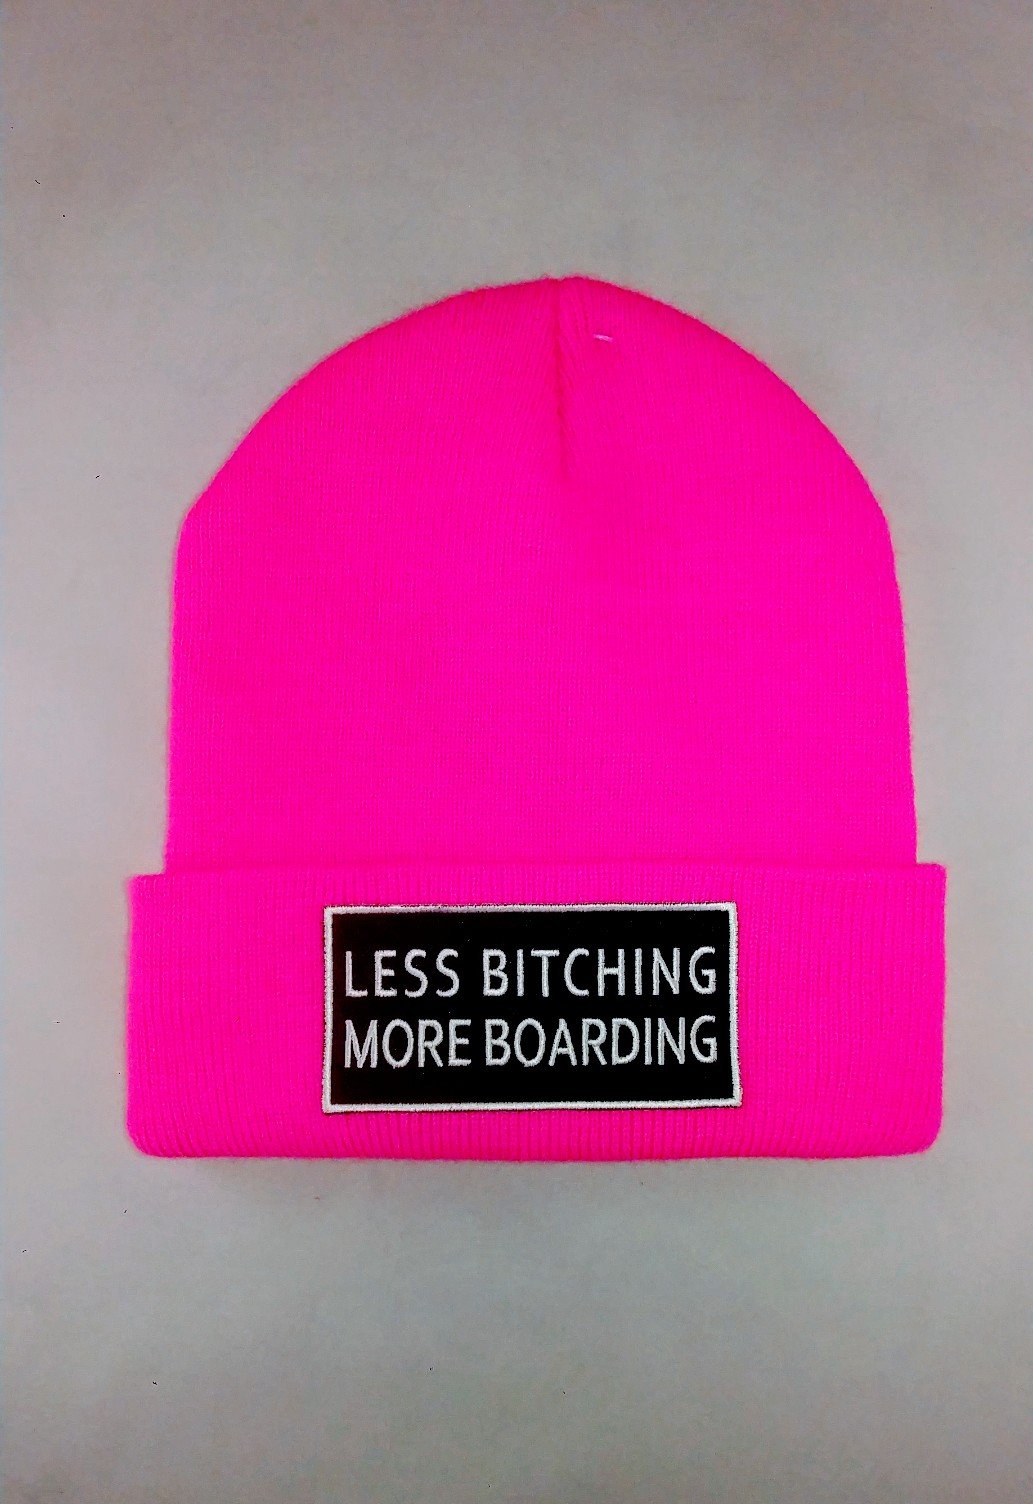 Image of Shred Life "Less Bitching" Beanies